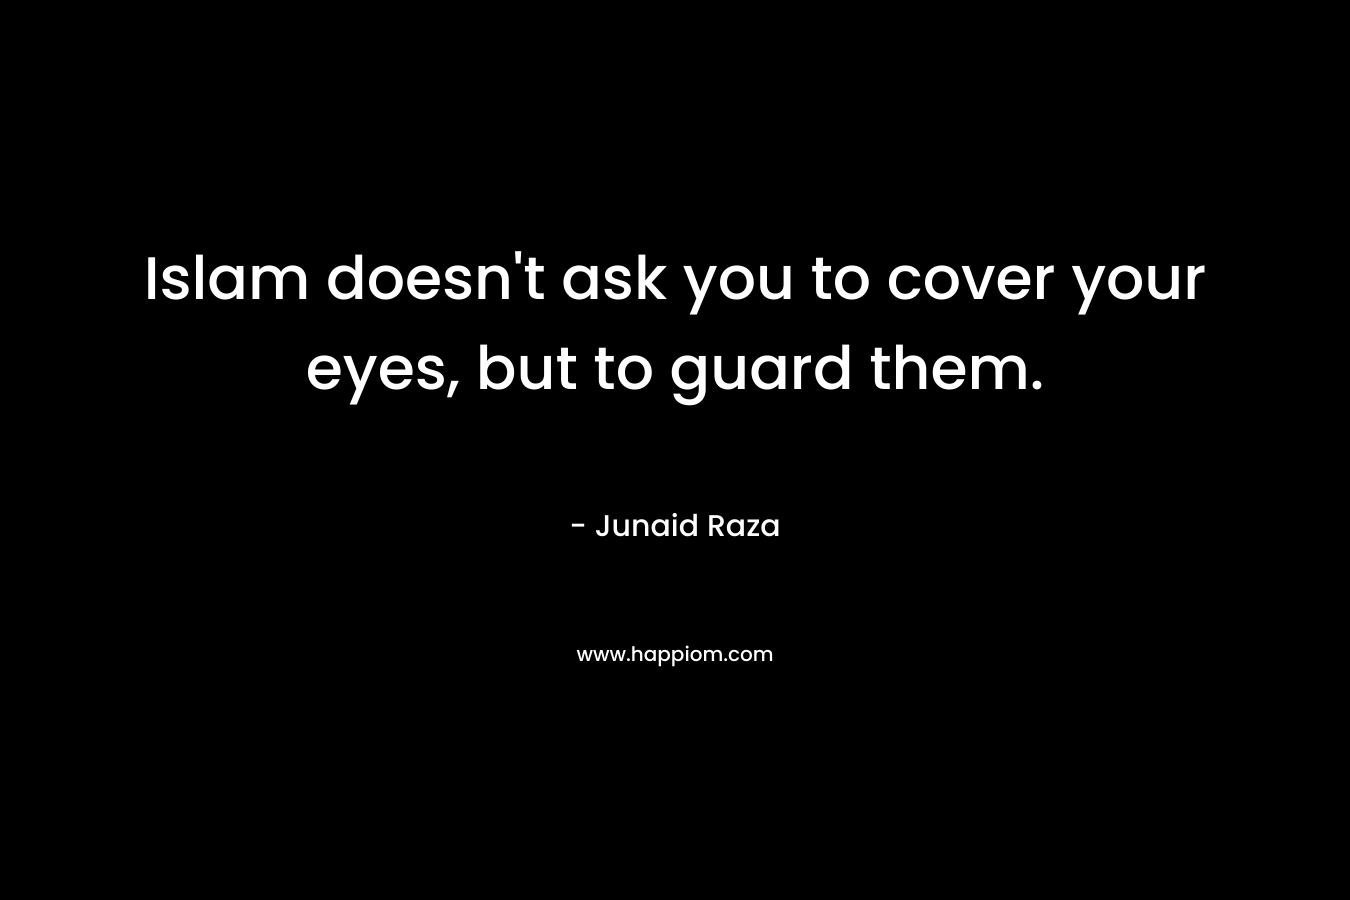 Islam doesn't ask you to cover your eyes, but to guard them.